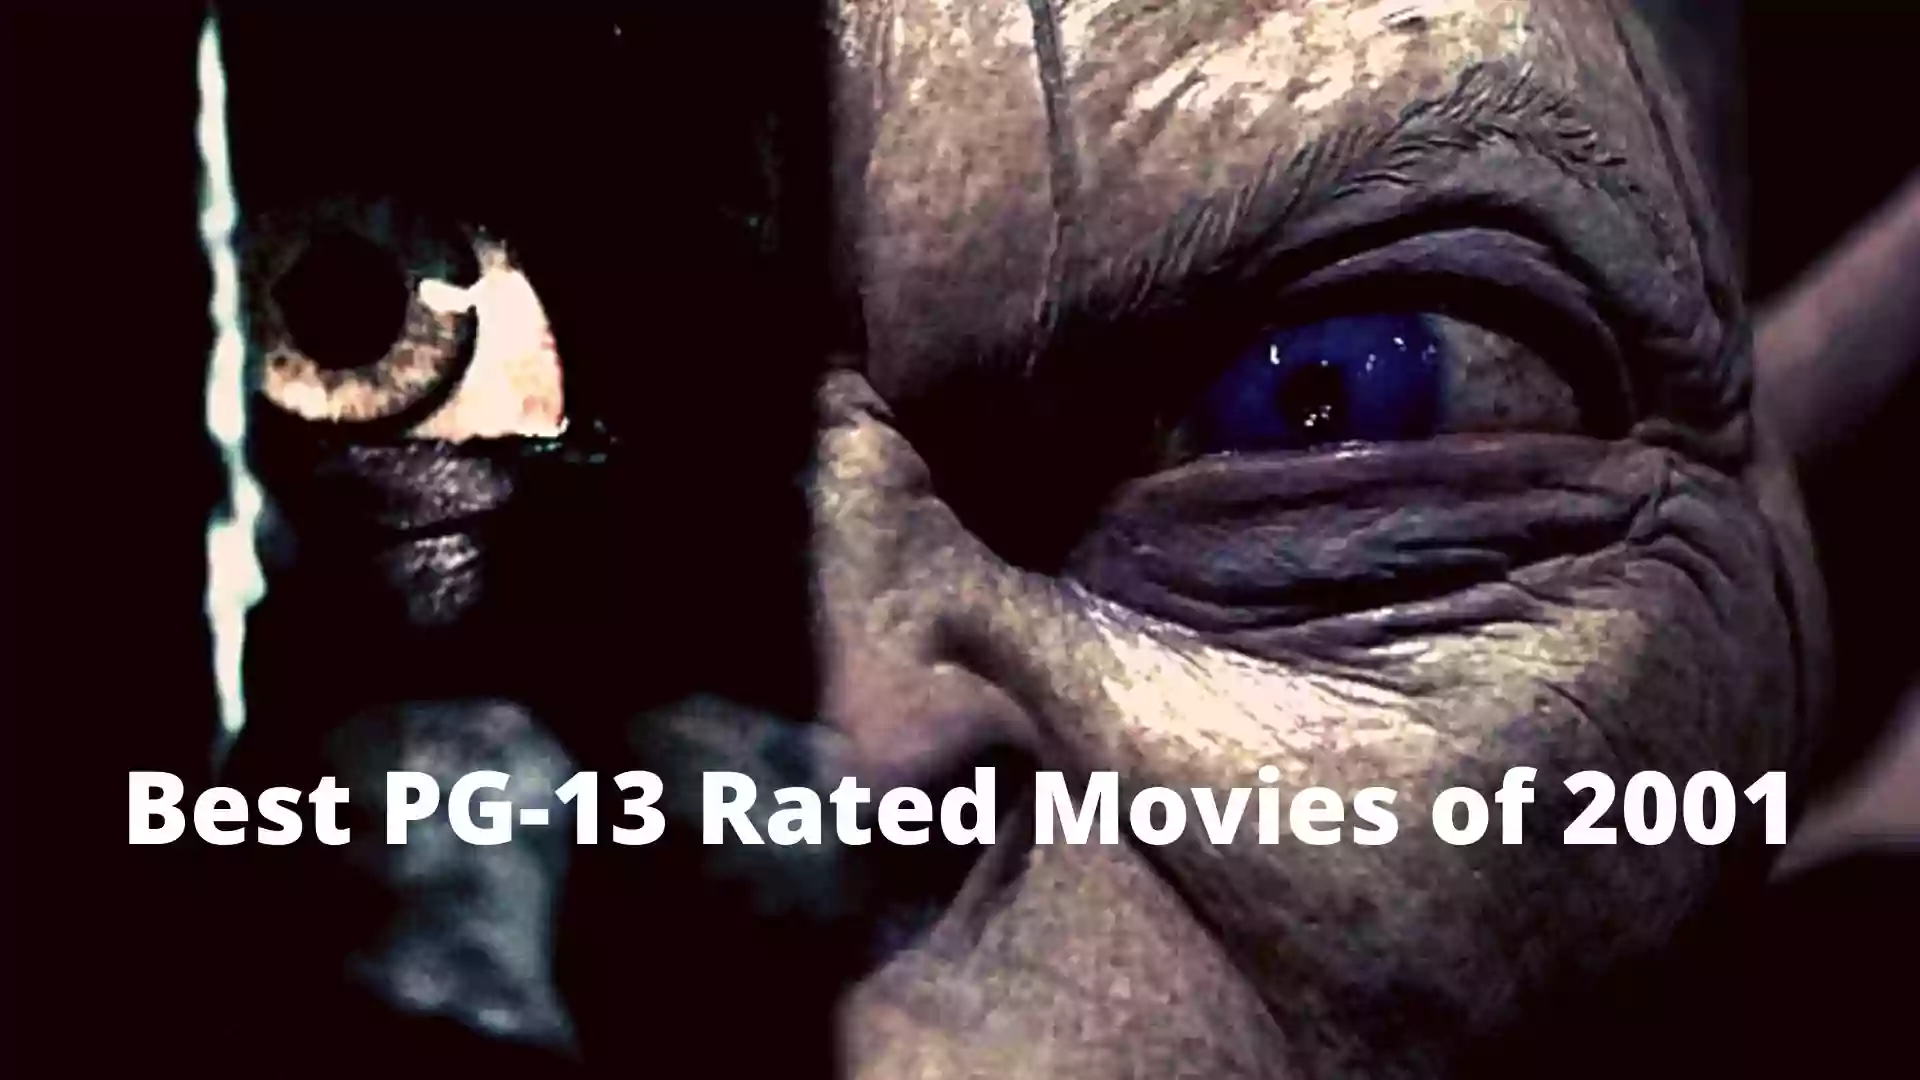 Best PG-13 Rated Movies of 2001